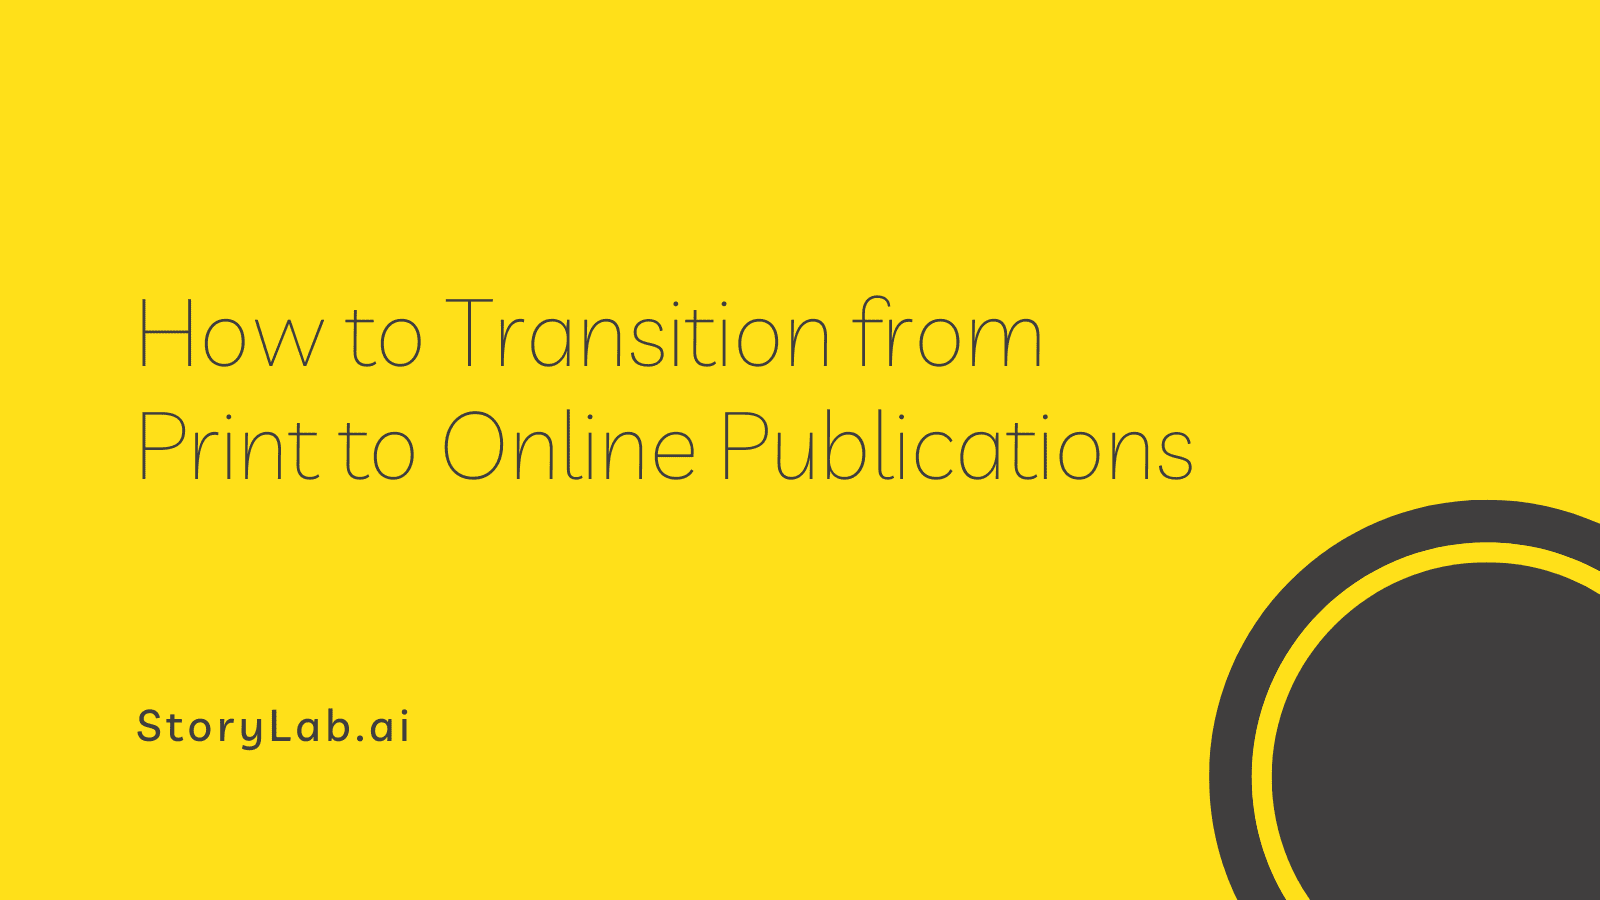 How to Transition from Print to Online Publications